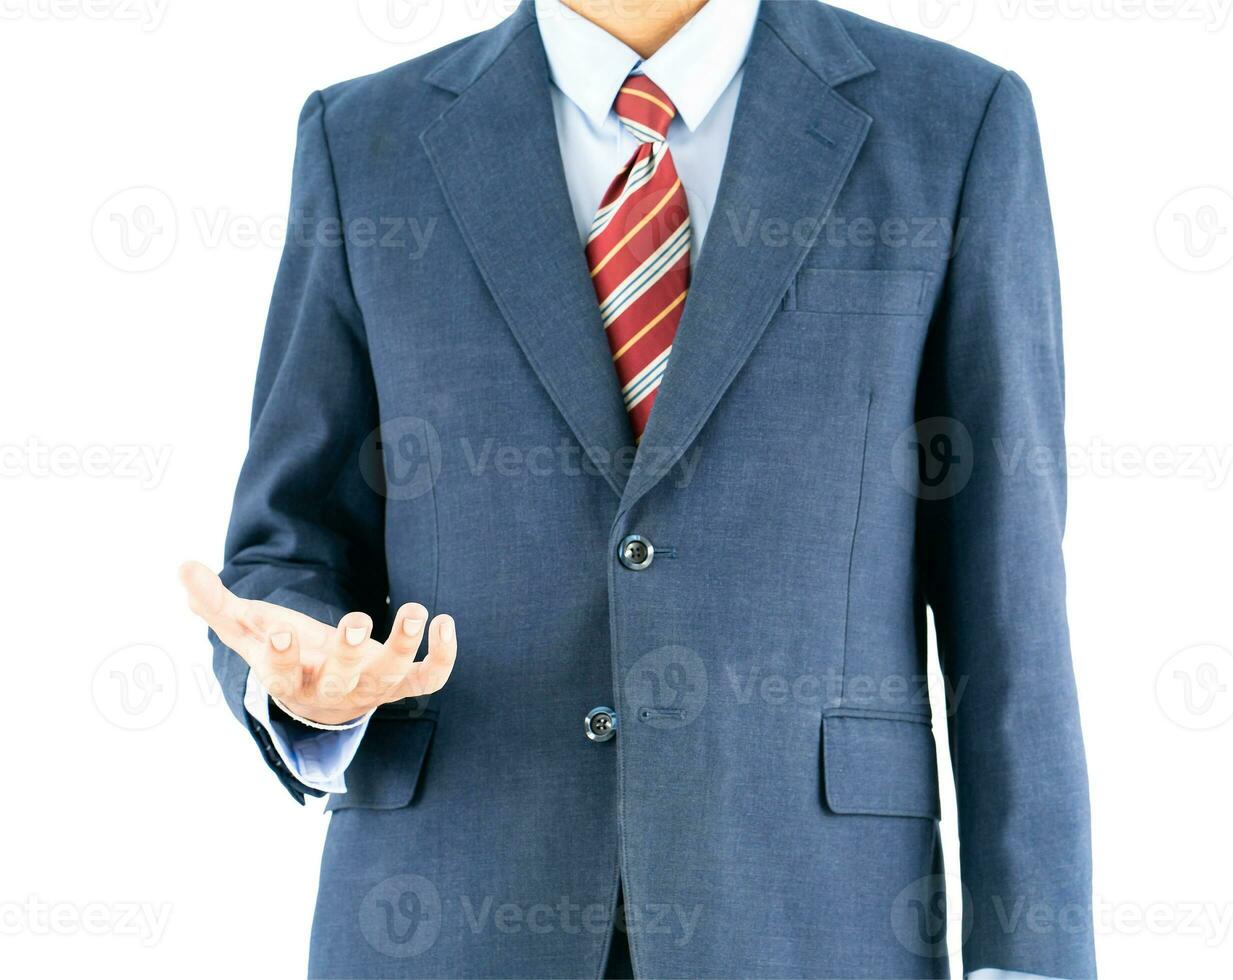 Male wearing blue in suit reaching hand out with clipping path photo